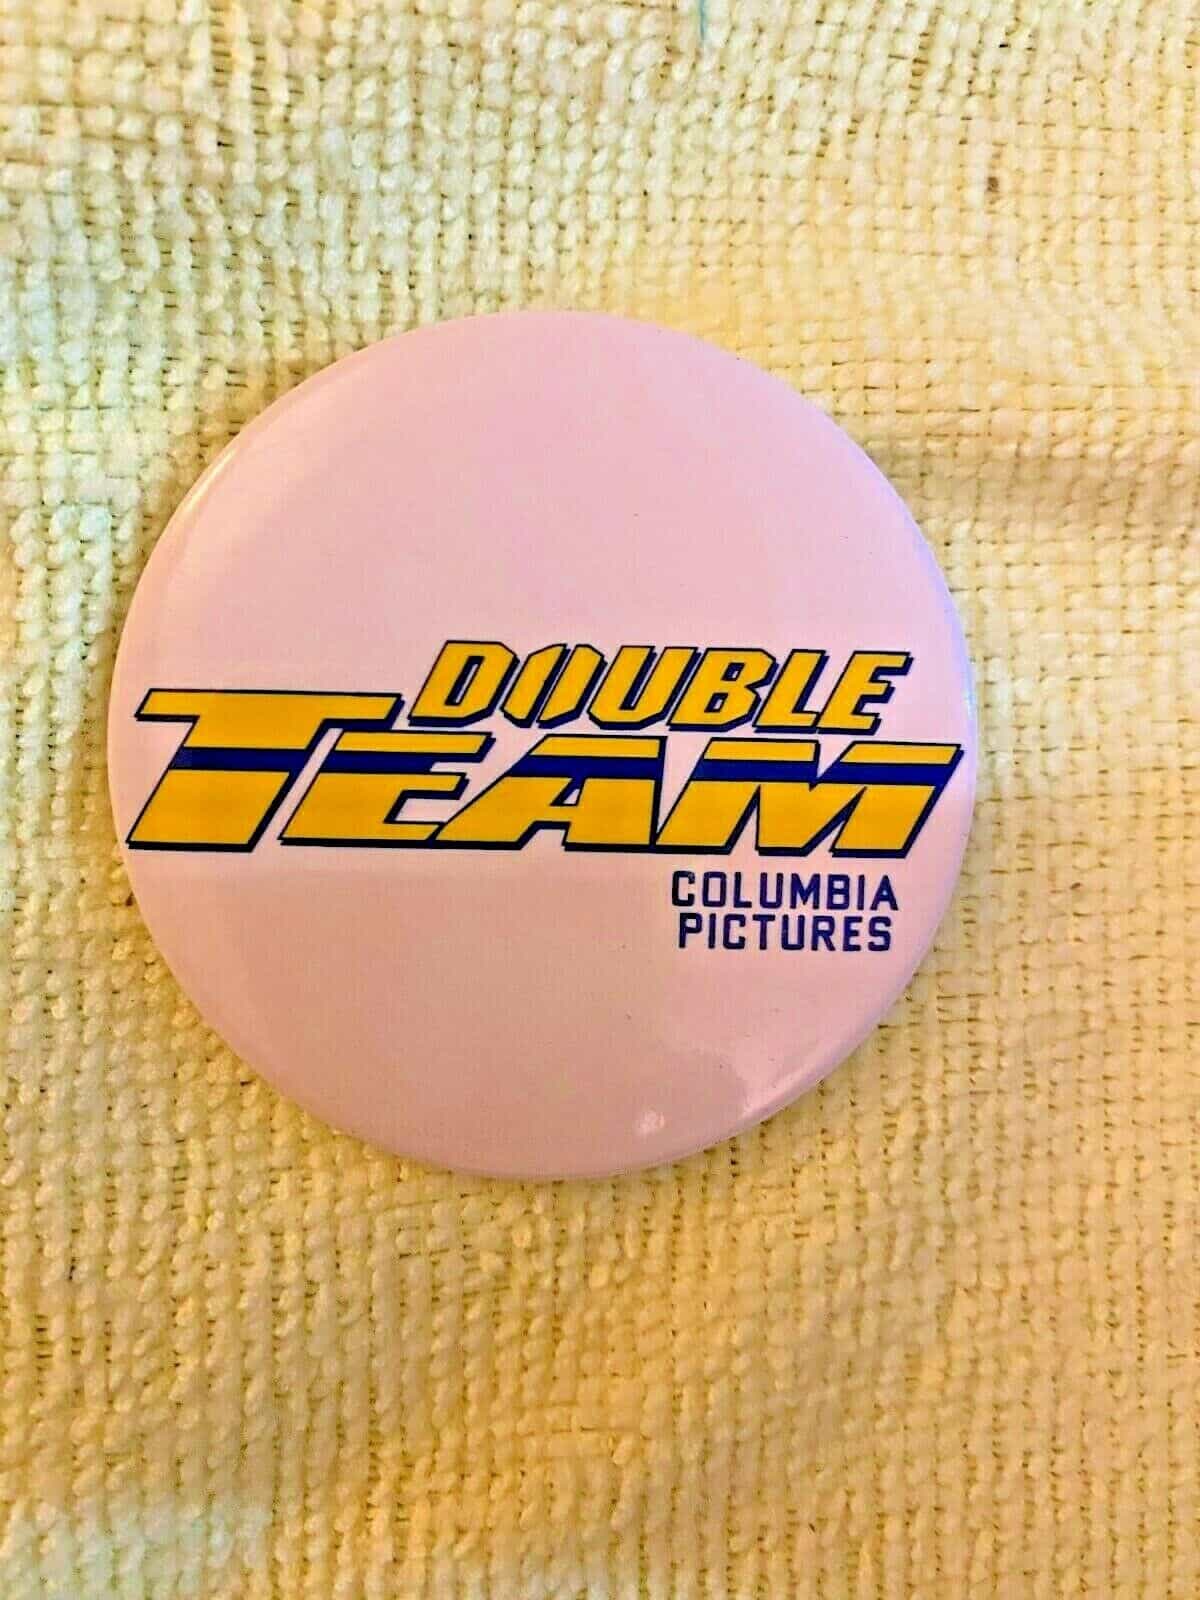 Double Team by Columbia Pictures Movie Collector Button